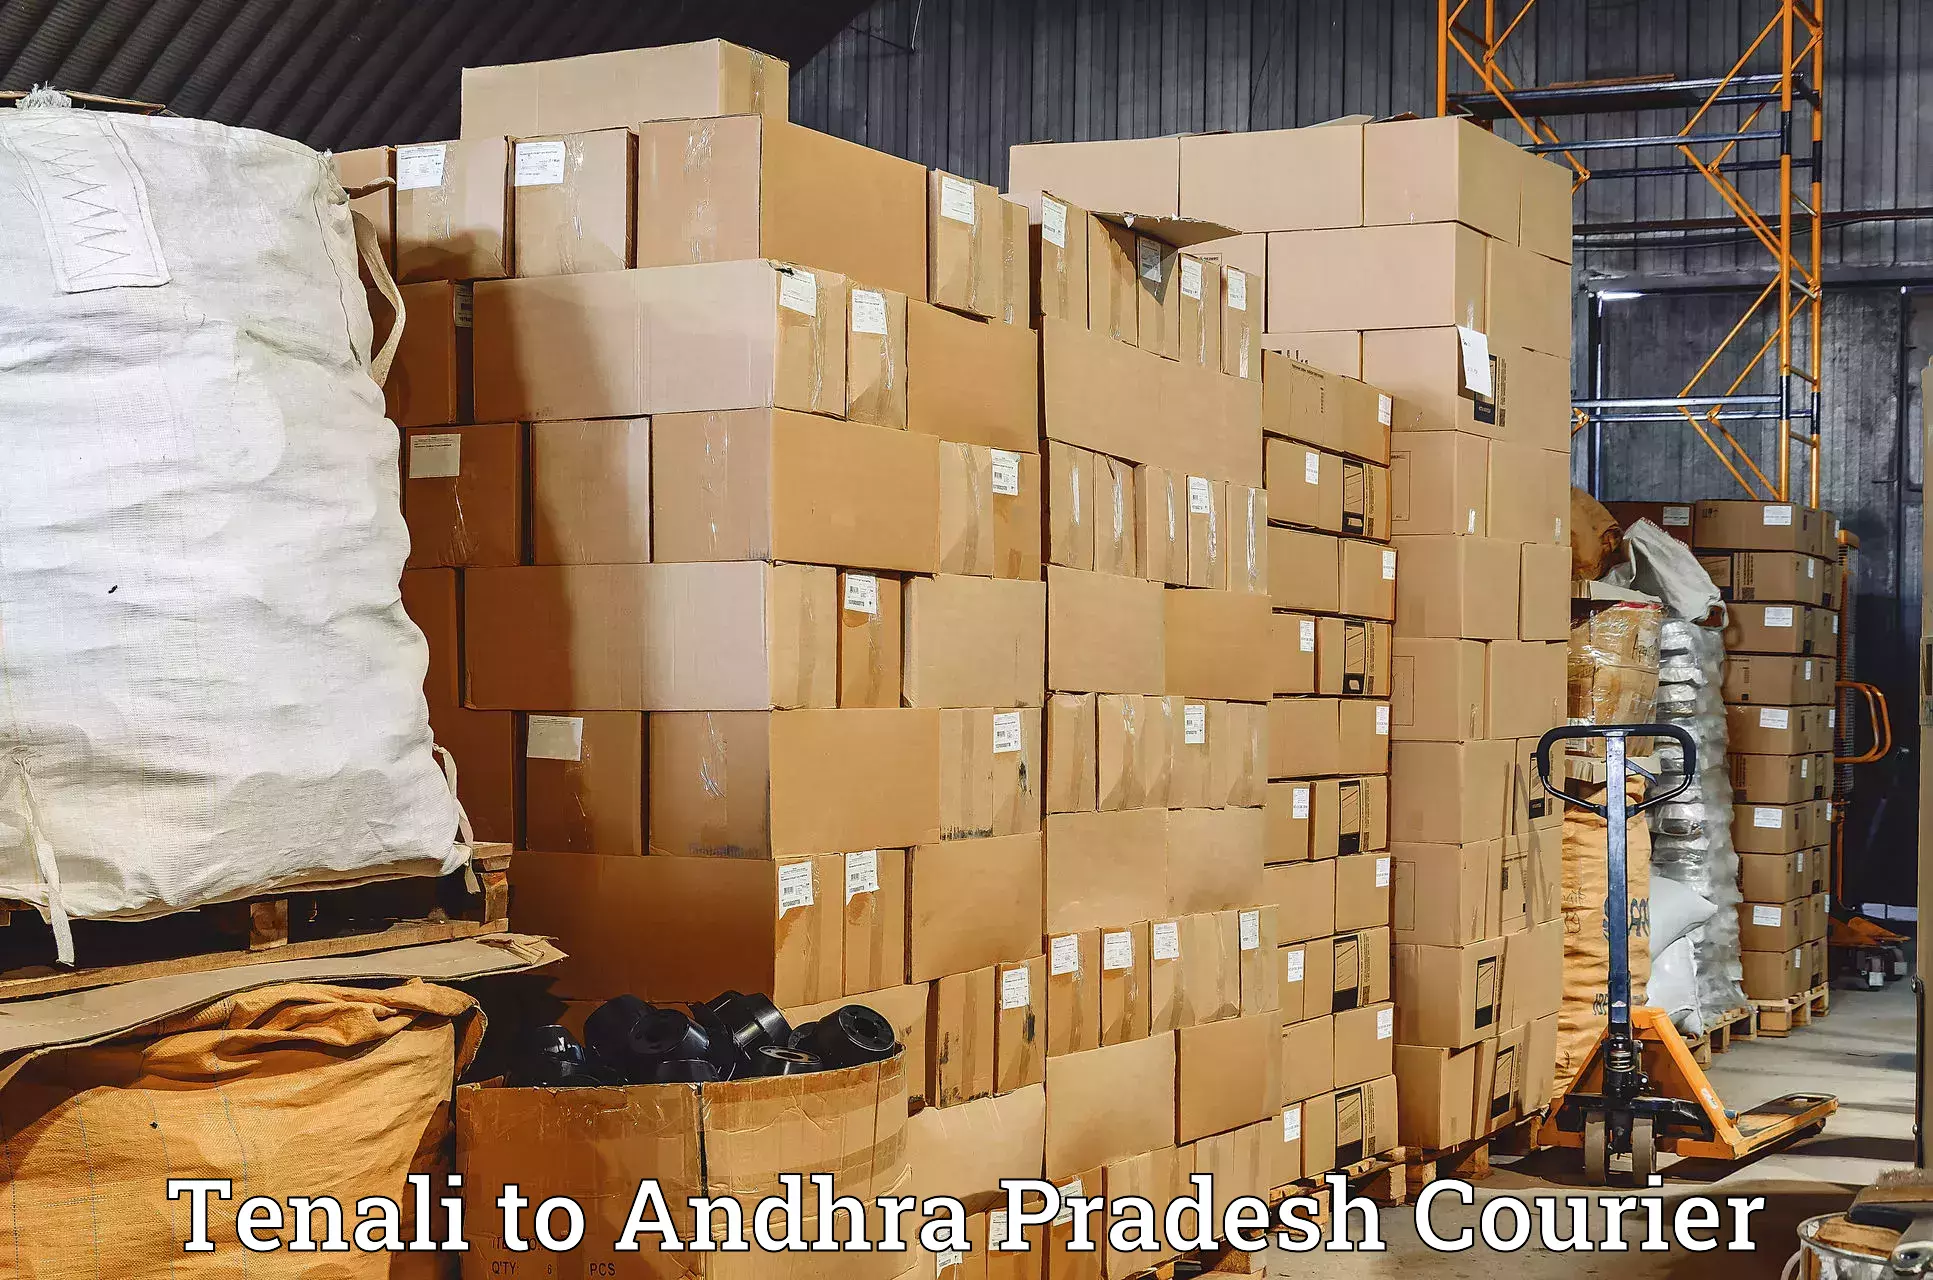 Parcel handling and care Tenali to Visakhapatnam Port